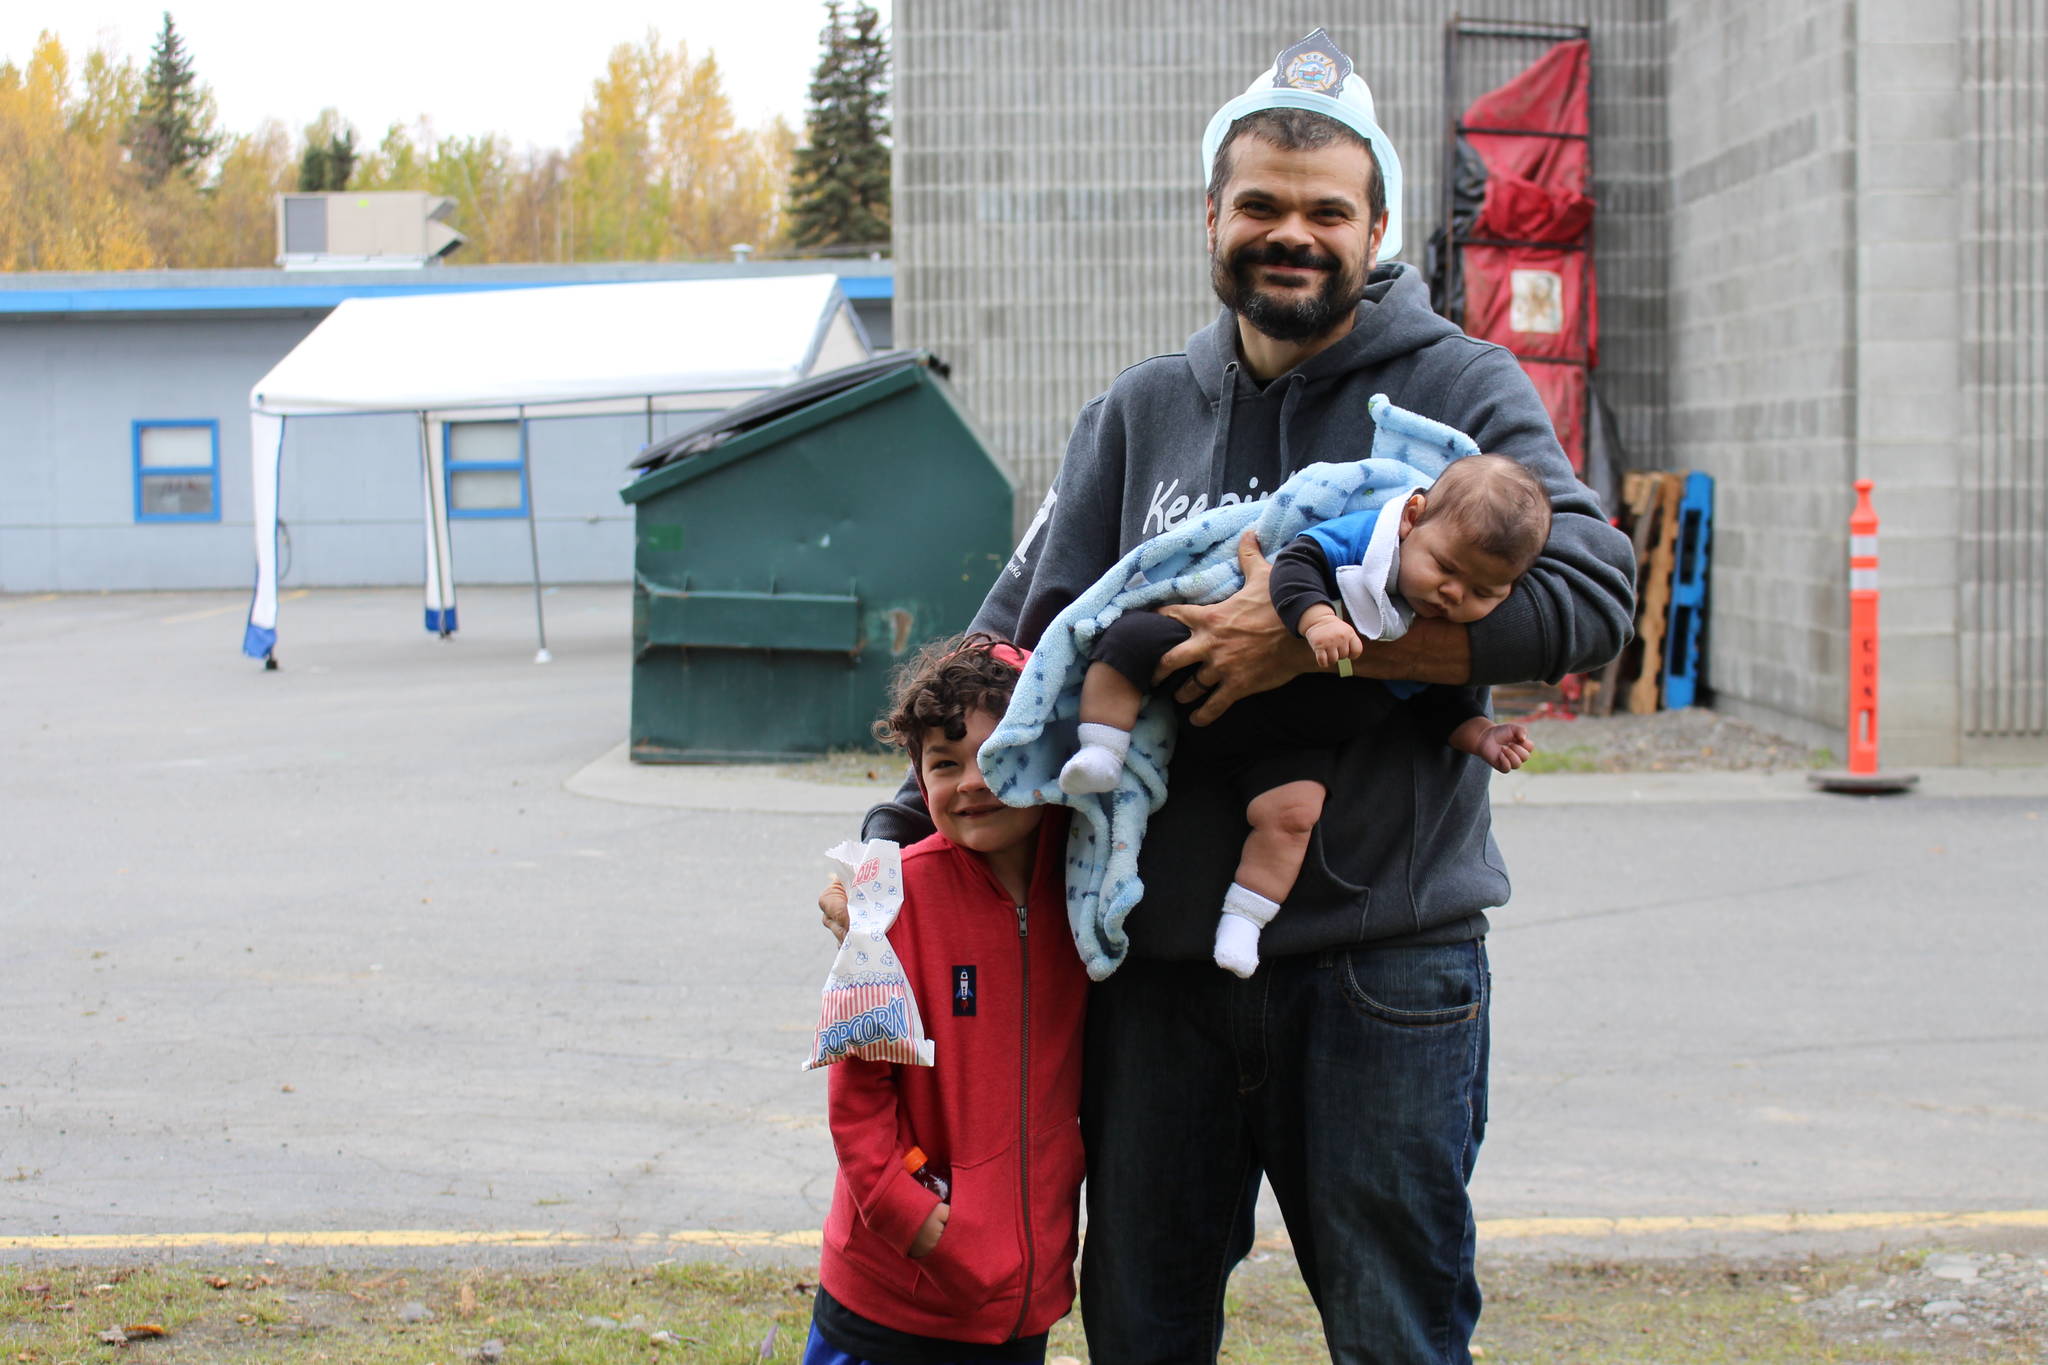 From left, Manny Peterson, Jacob Peterson and baby Ezra Peterson smile for the camera during the Central Emergency Services Open House at Fire Station 1 in Soldotna, Alaska on Sept. 28, 2019. (Photo by Brian Mazurek/Peninsula Clarion)